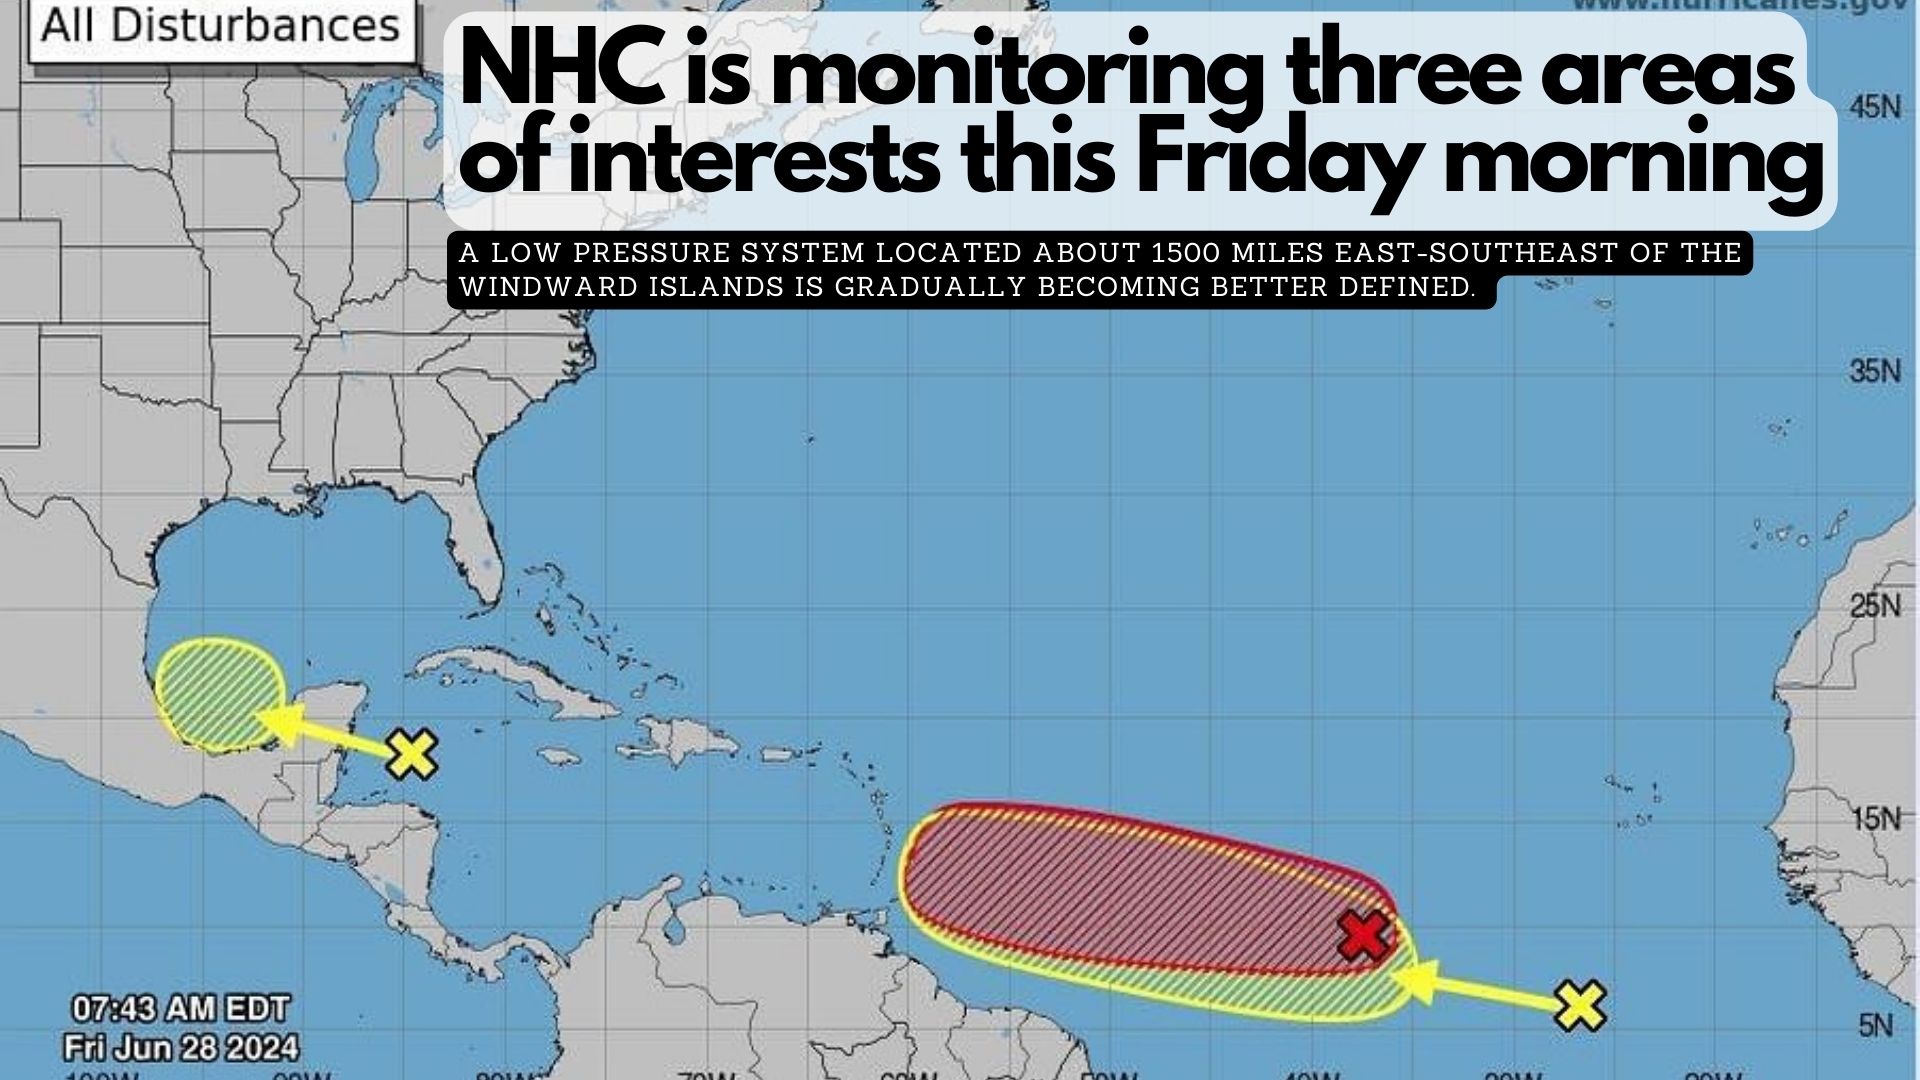 NHC is monitoring three areas of interests this Friday morning